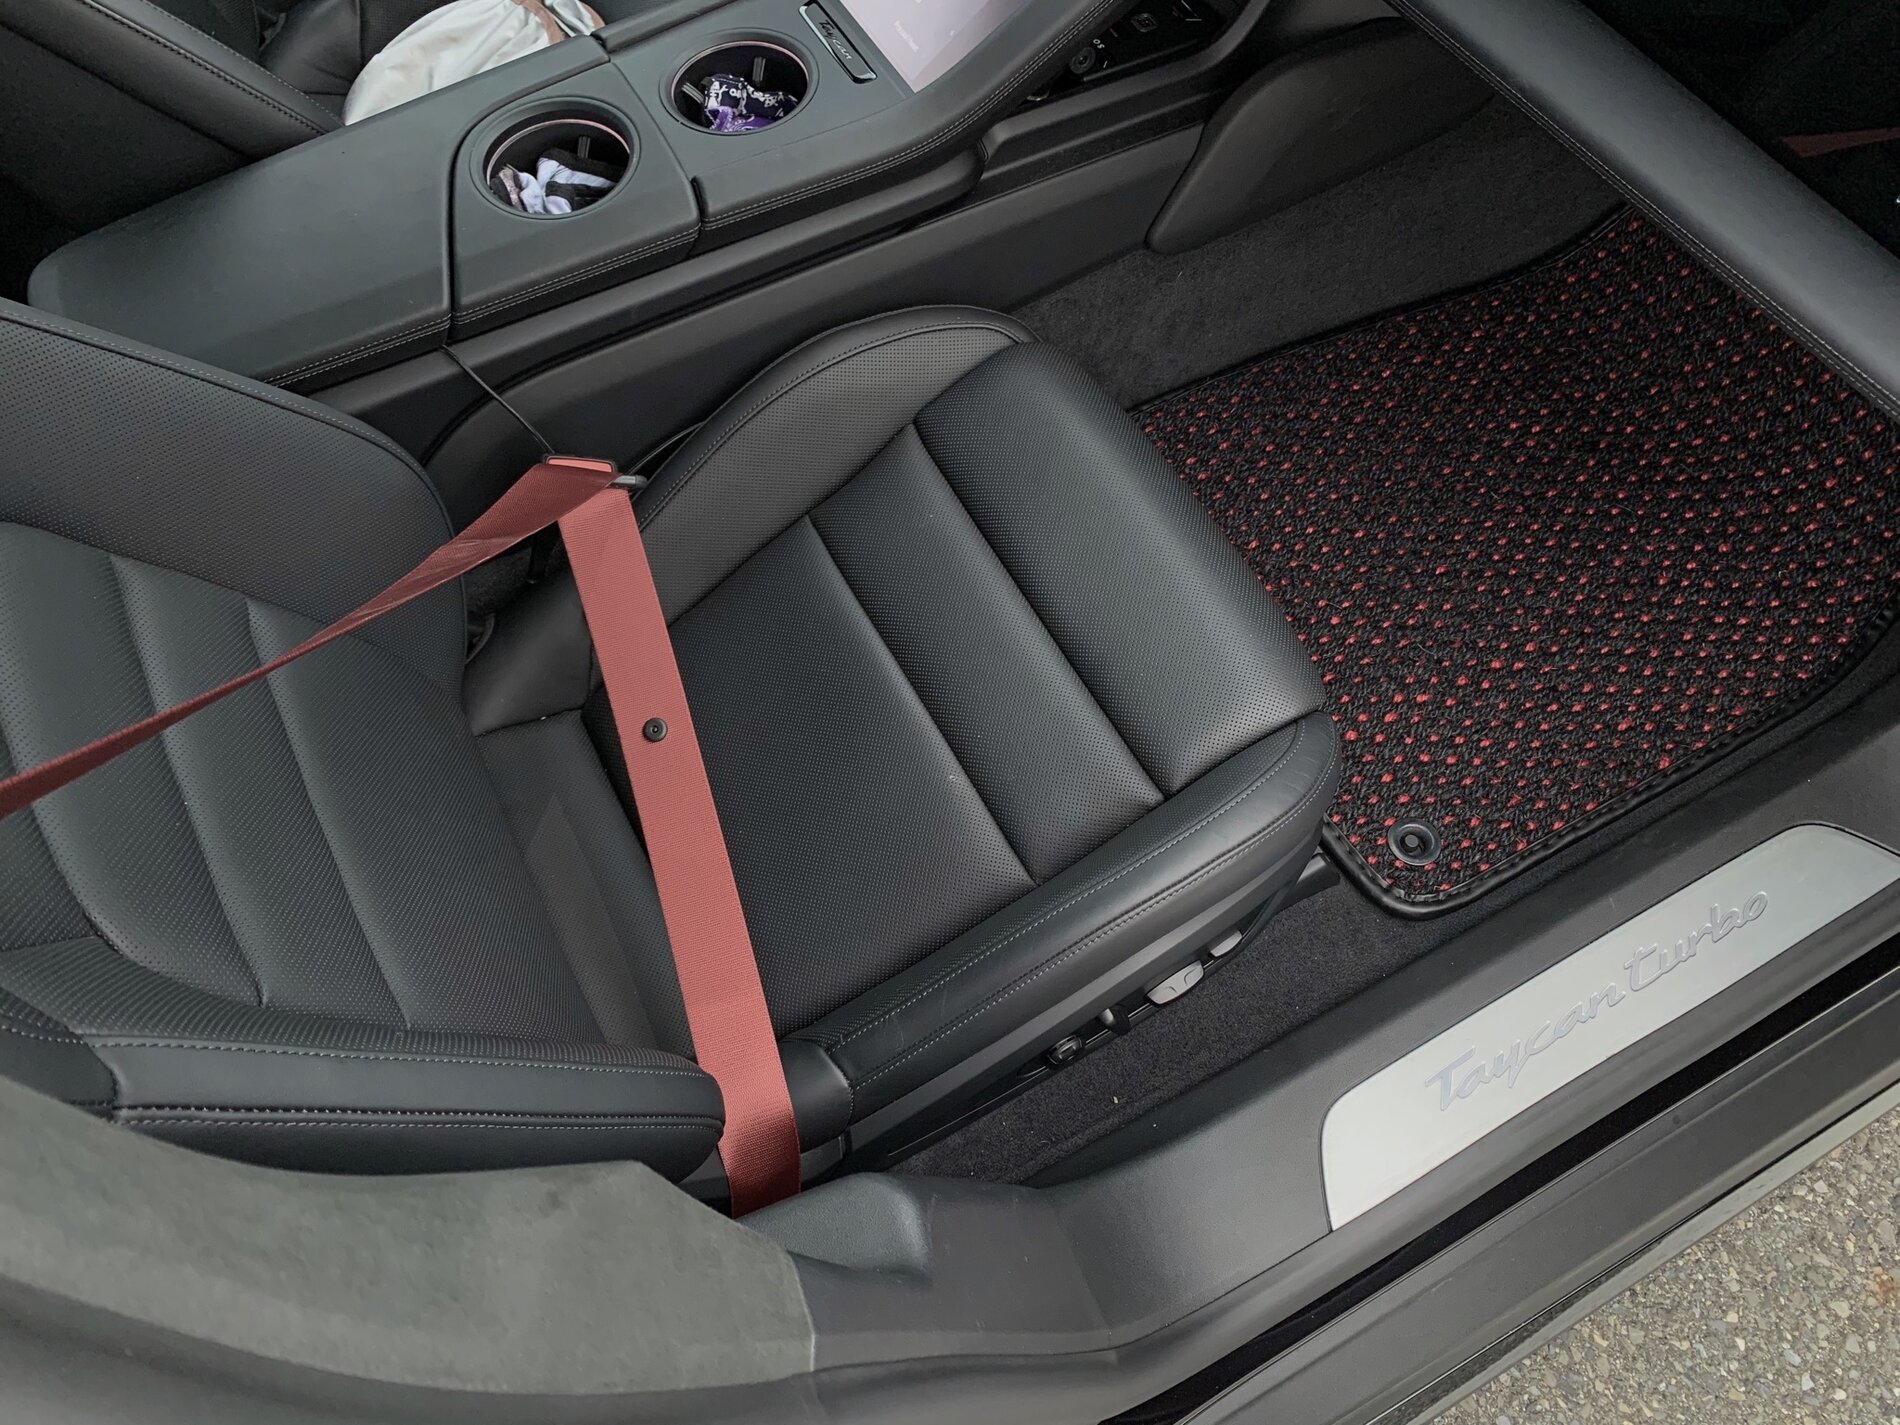 Recall Seat Belt Warning System Malfunction March 17, 2023 (Covers